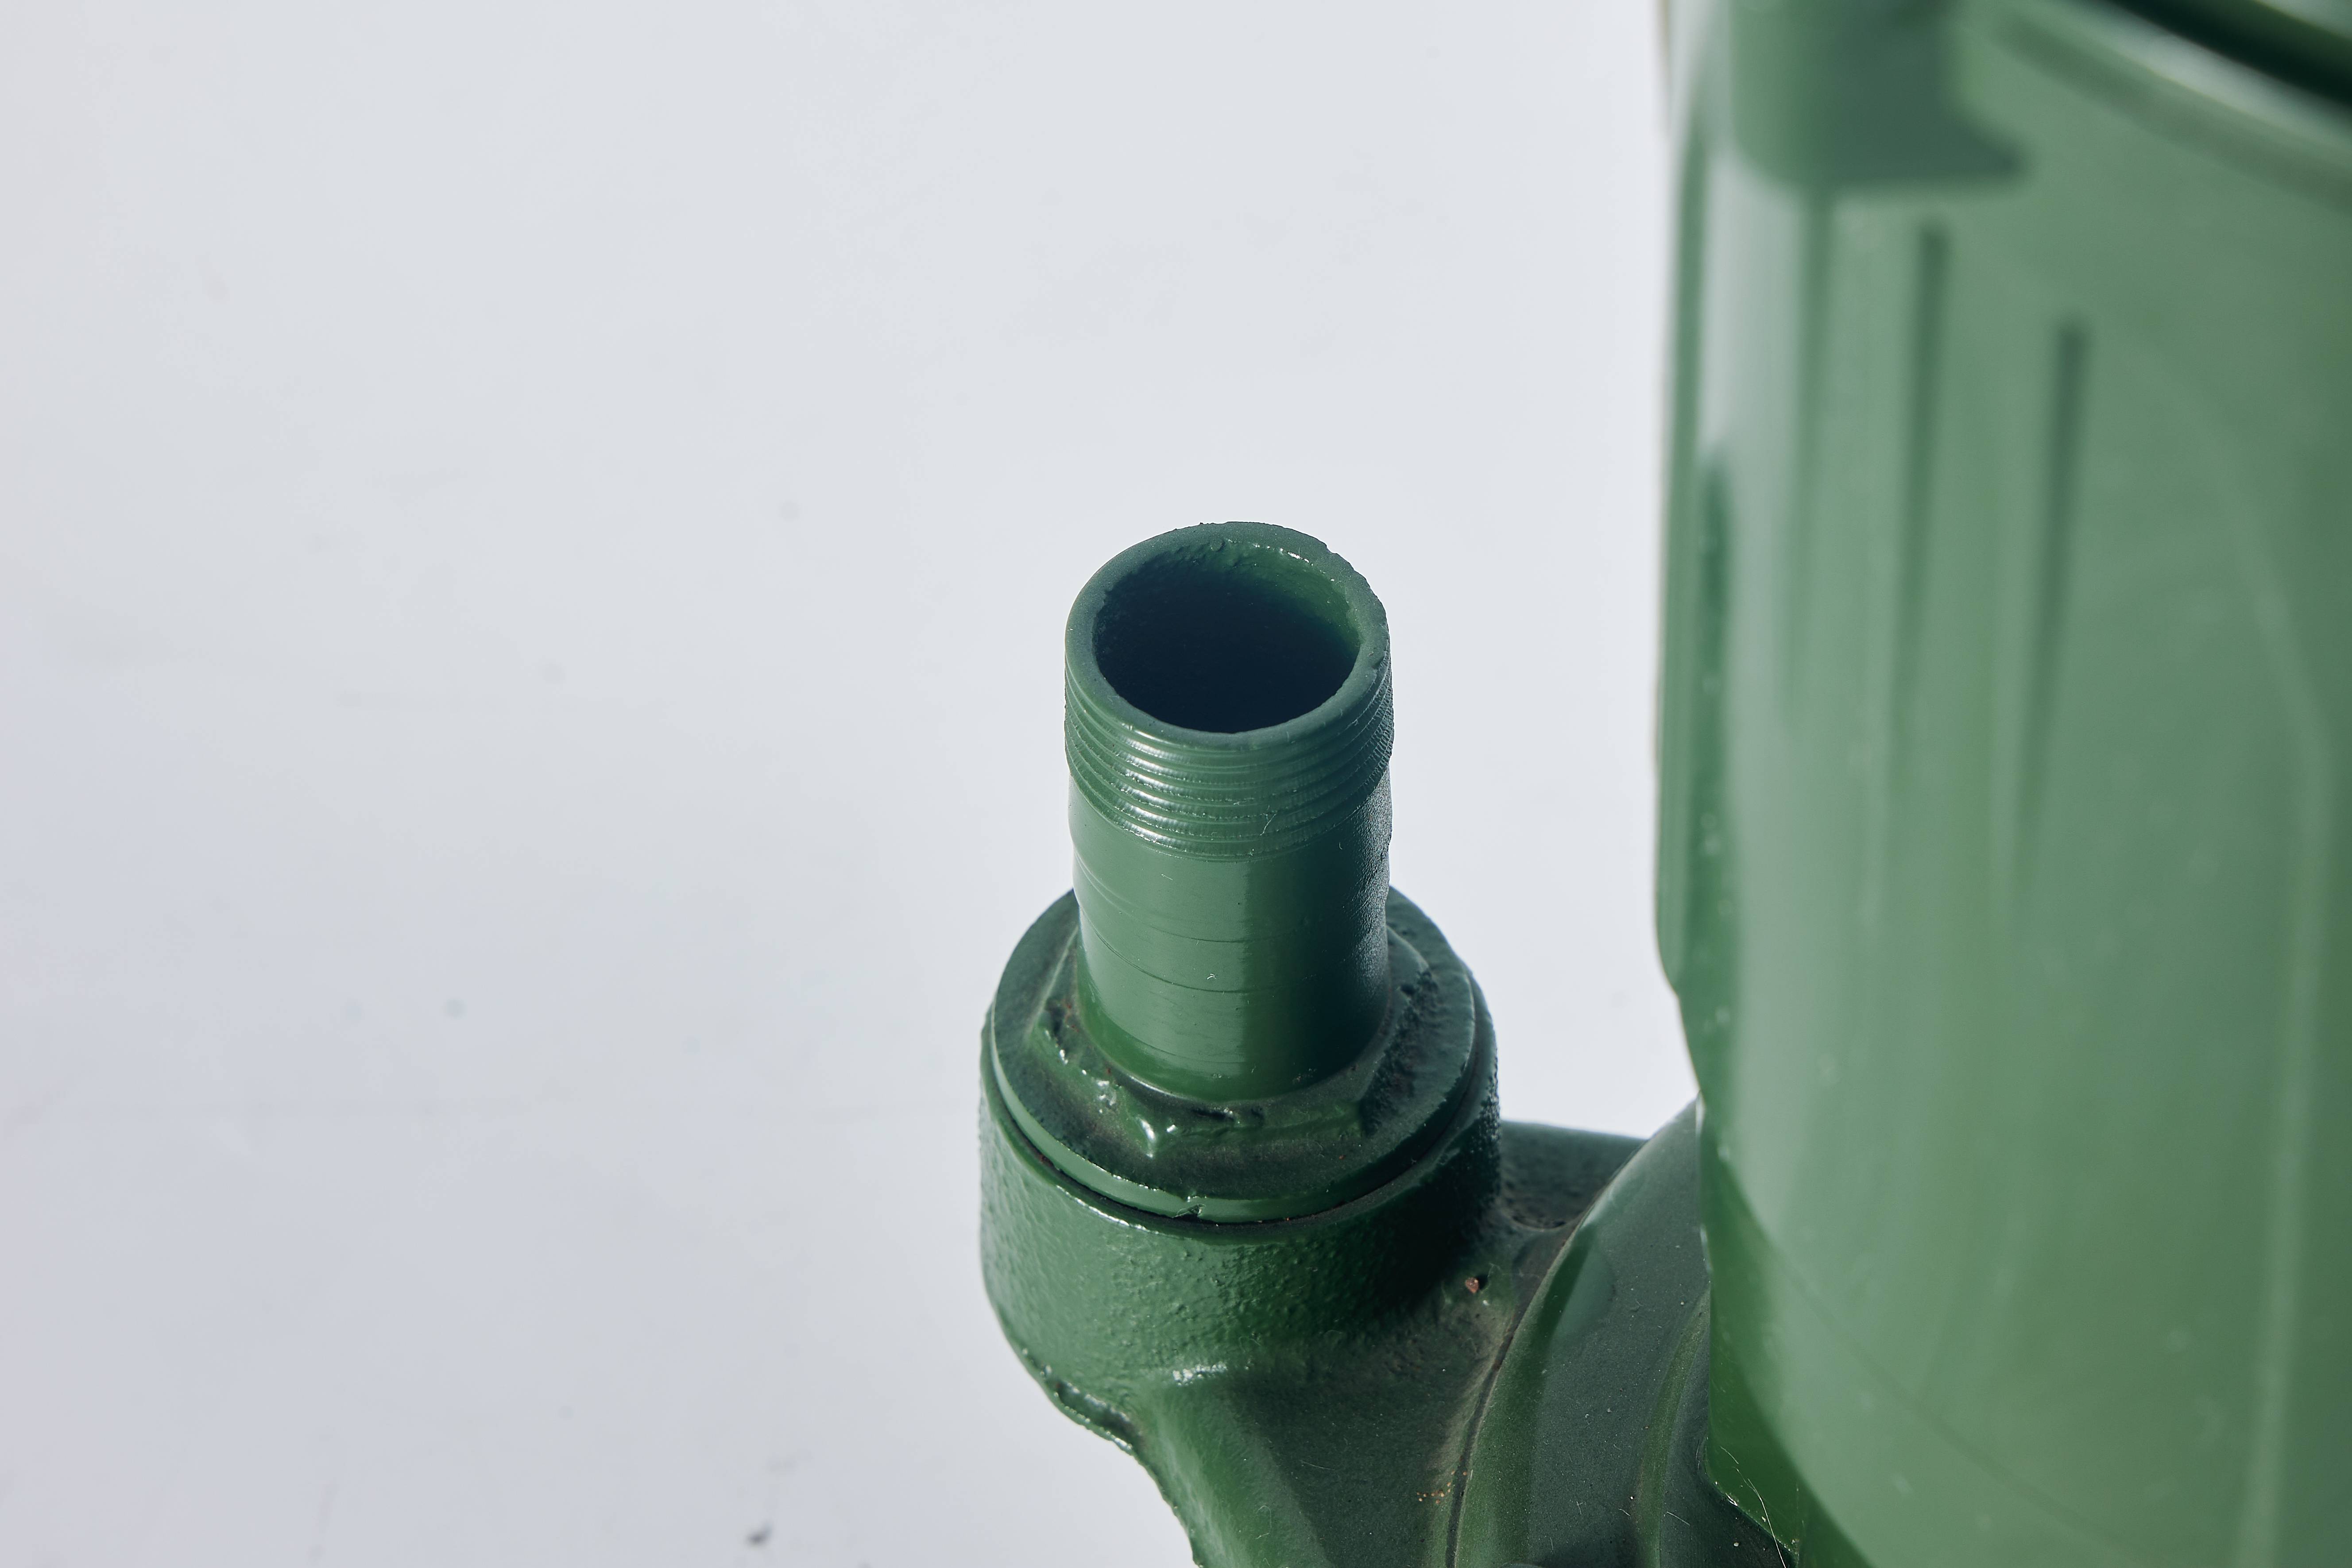 Drainage pump, submersible clean water pump for home irrigation, electric clean water submersible pump OEM ODM